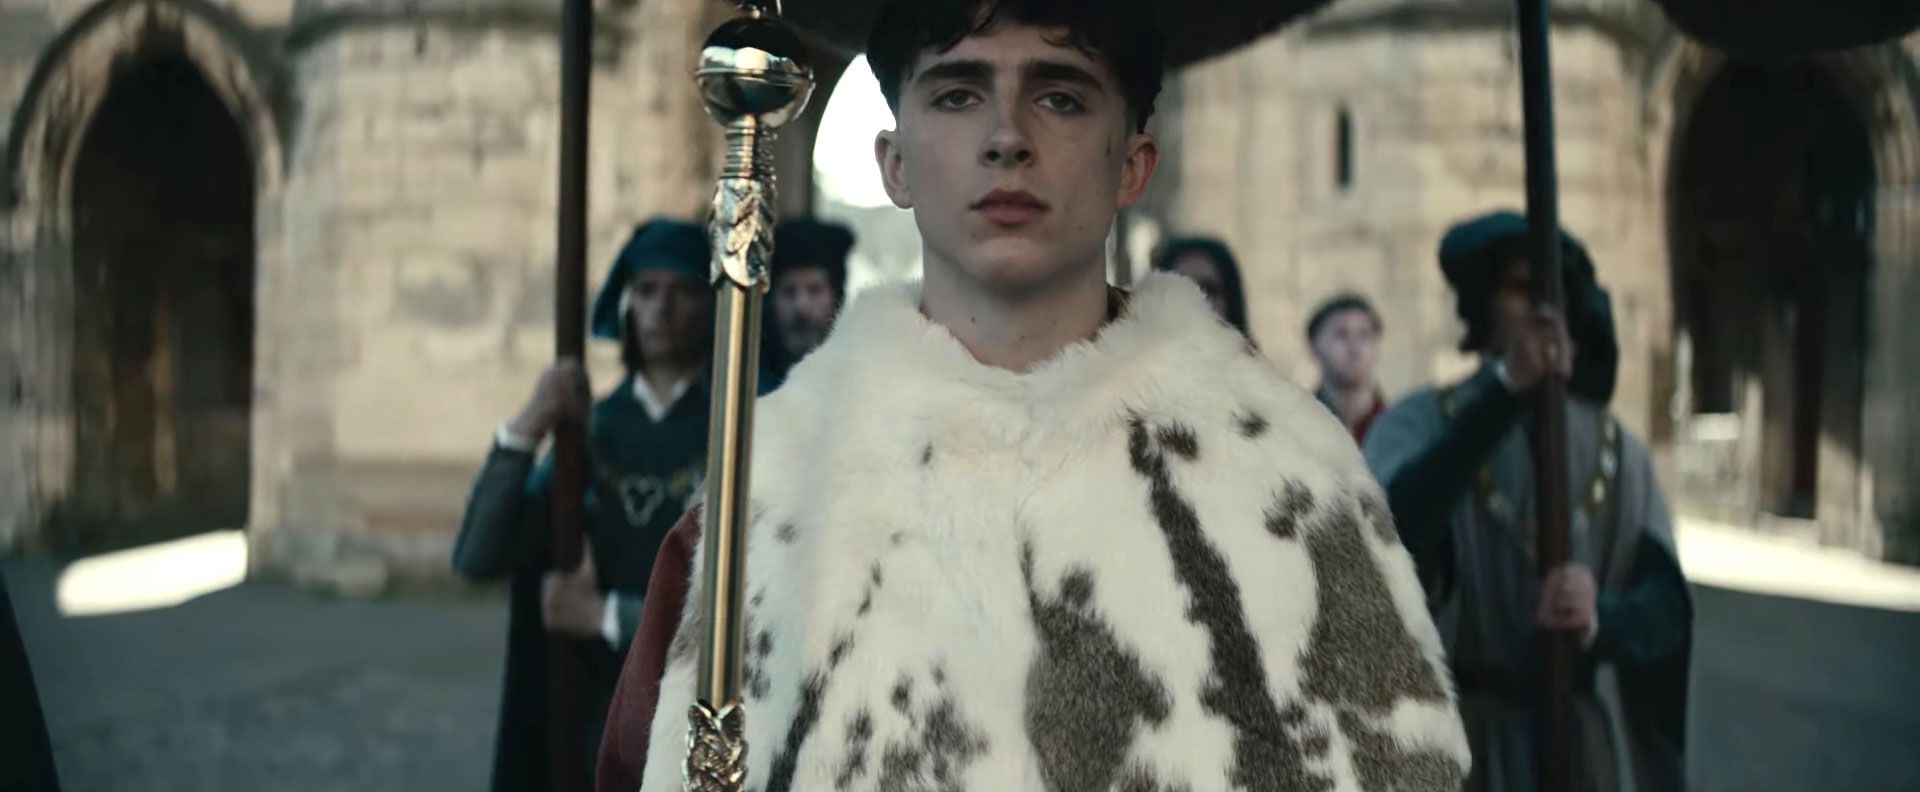 Netflix's The King with Timothee Chalamet Cast, Premiere Date, Trailer